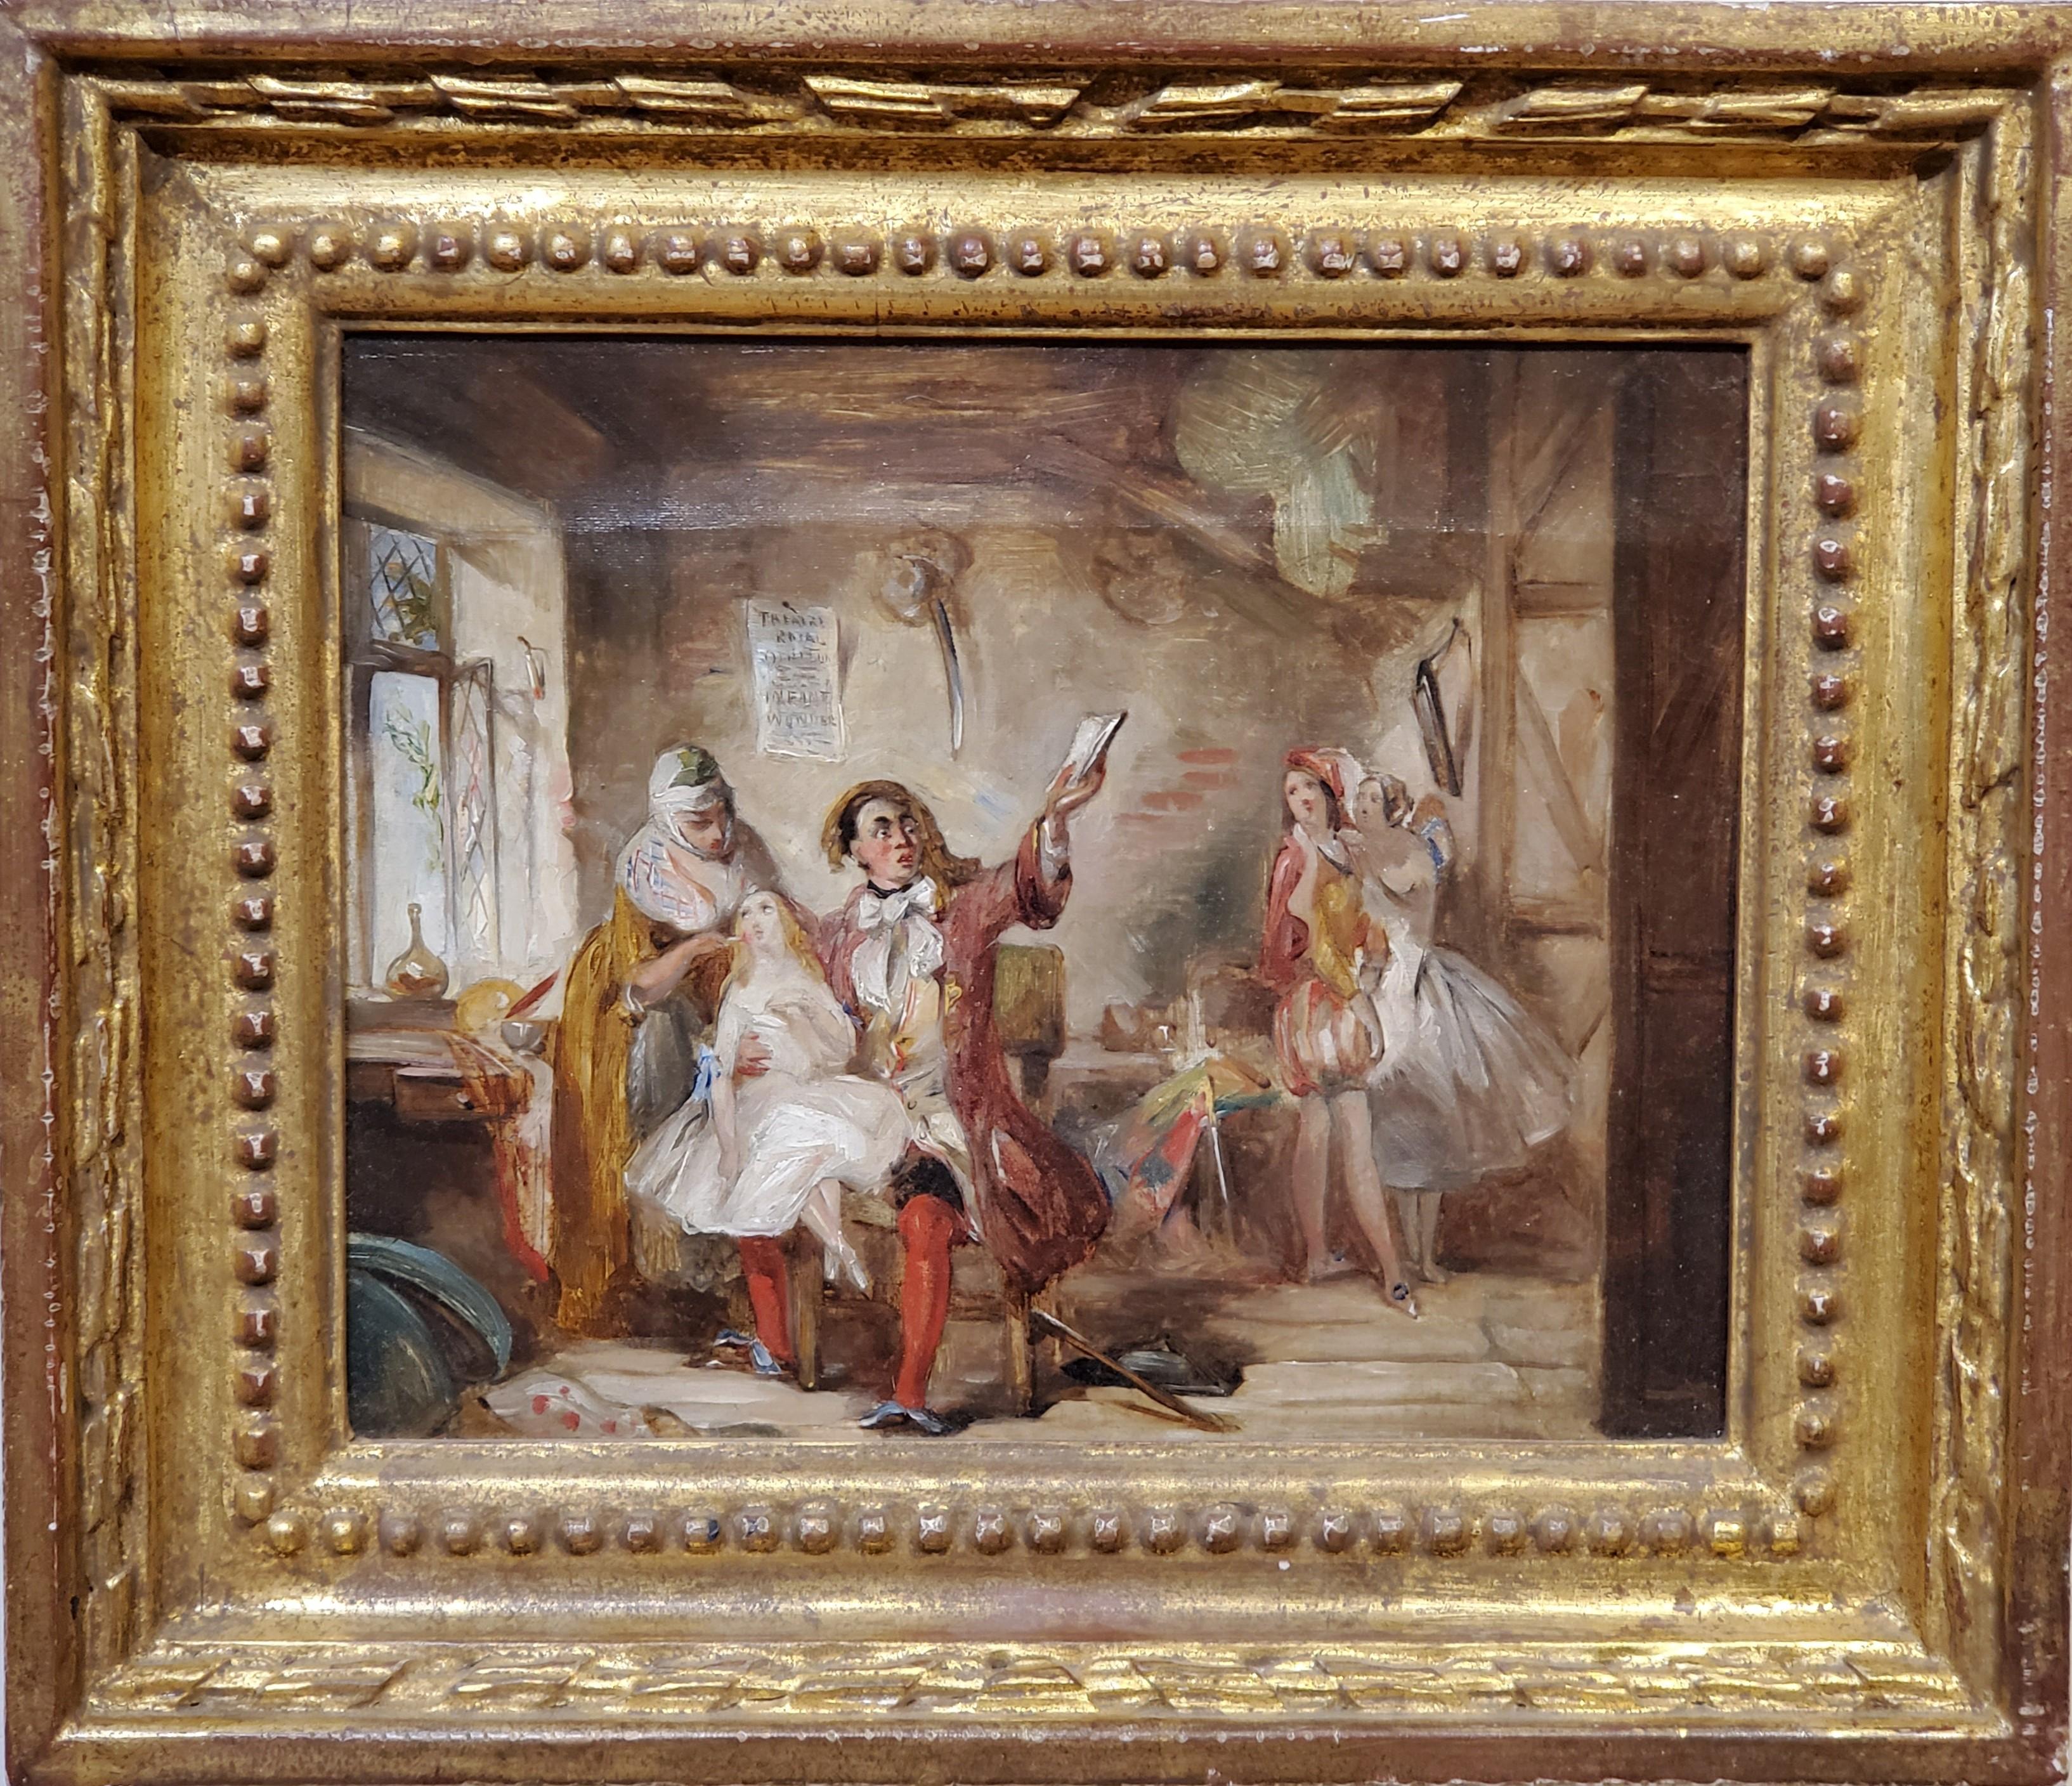 Backstage at the Theatre Royal, possibly depicting Ira Frederick Aldridge, an actor who lived from 1807 to 1867, rehearsing Othello, in 1862.

Othello Rehearsal A Small Oil Painting by Abraham Solomon

Oil on canvas, inscribed "A. Solomon Esquire"